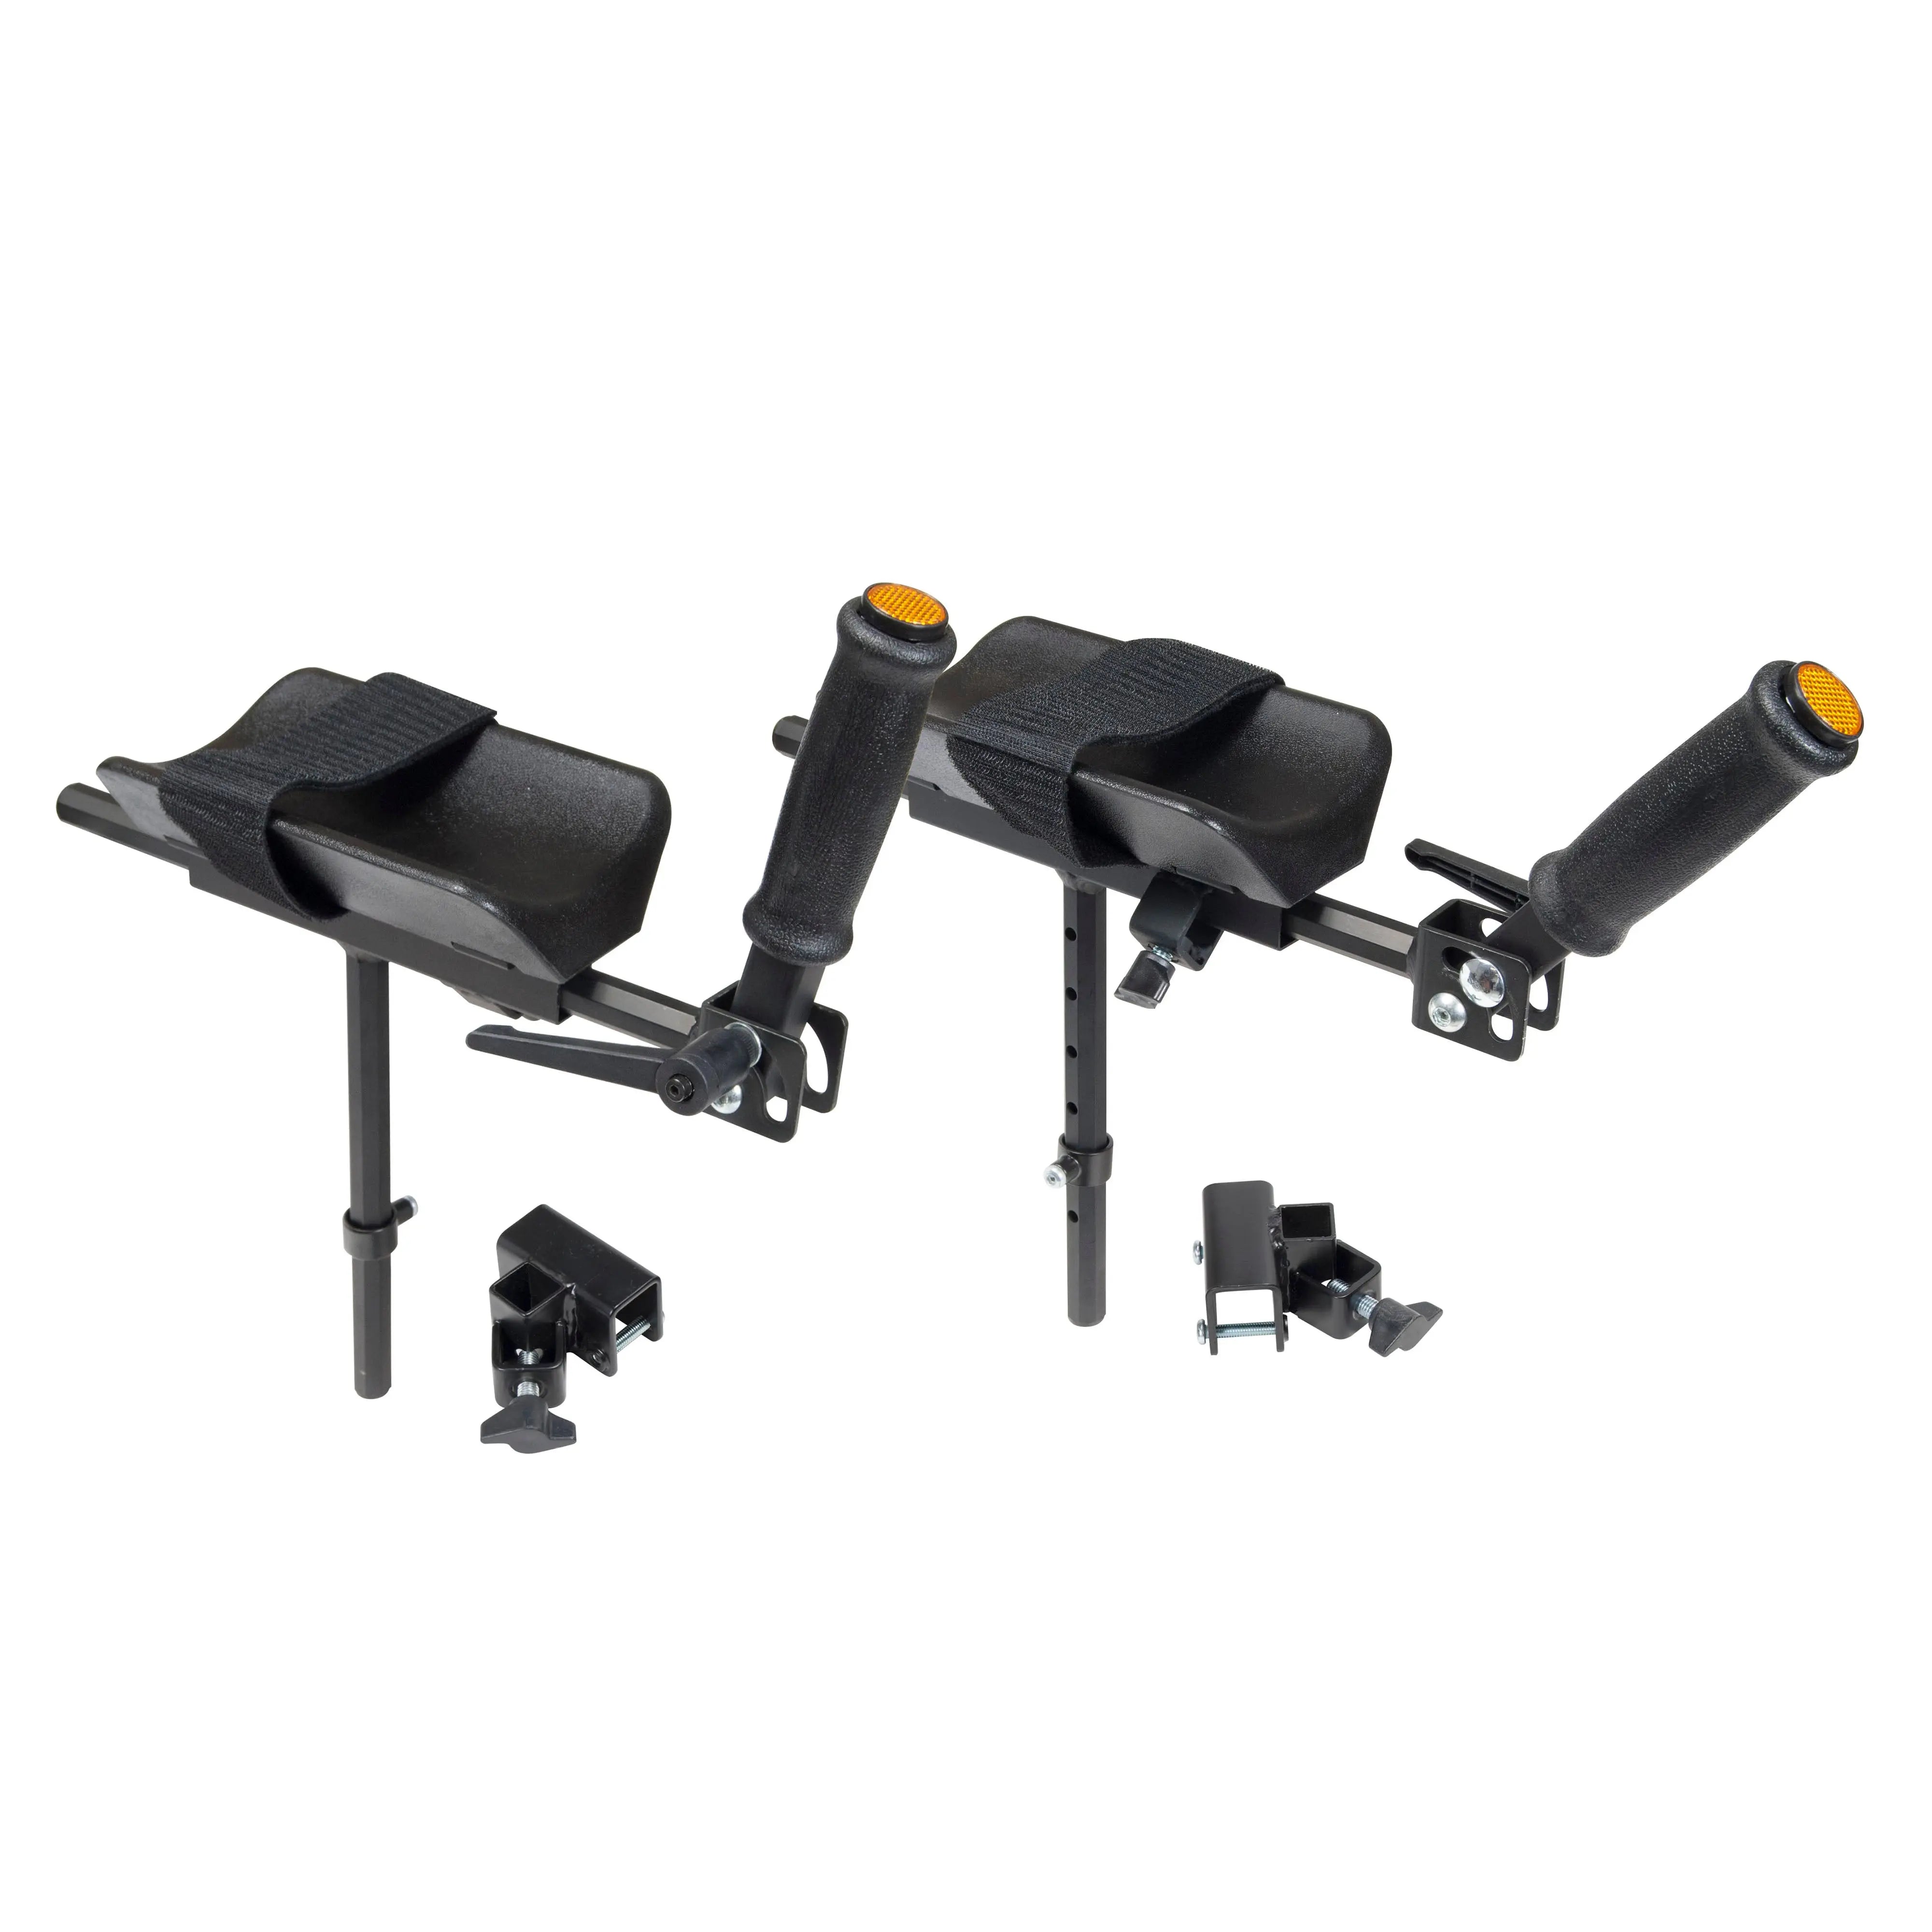 Forearm Platforms for all Wenzelite Safety Rollers and Gait Trainers